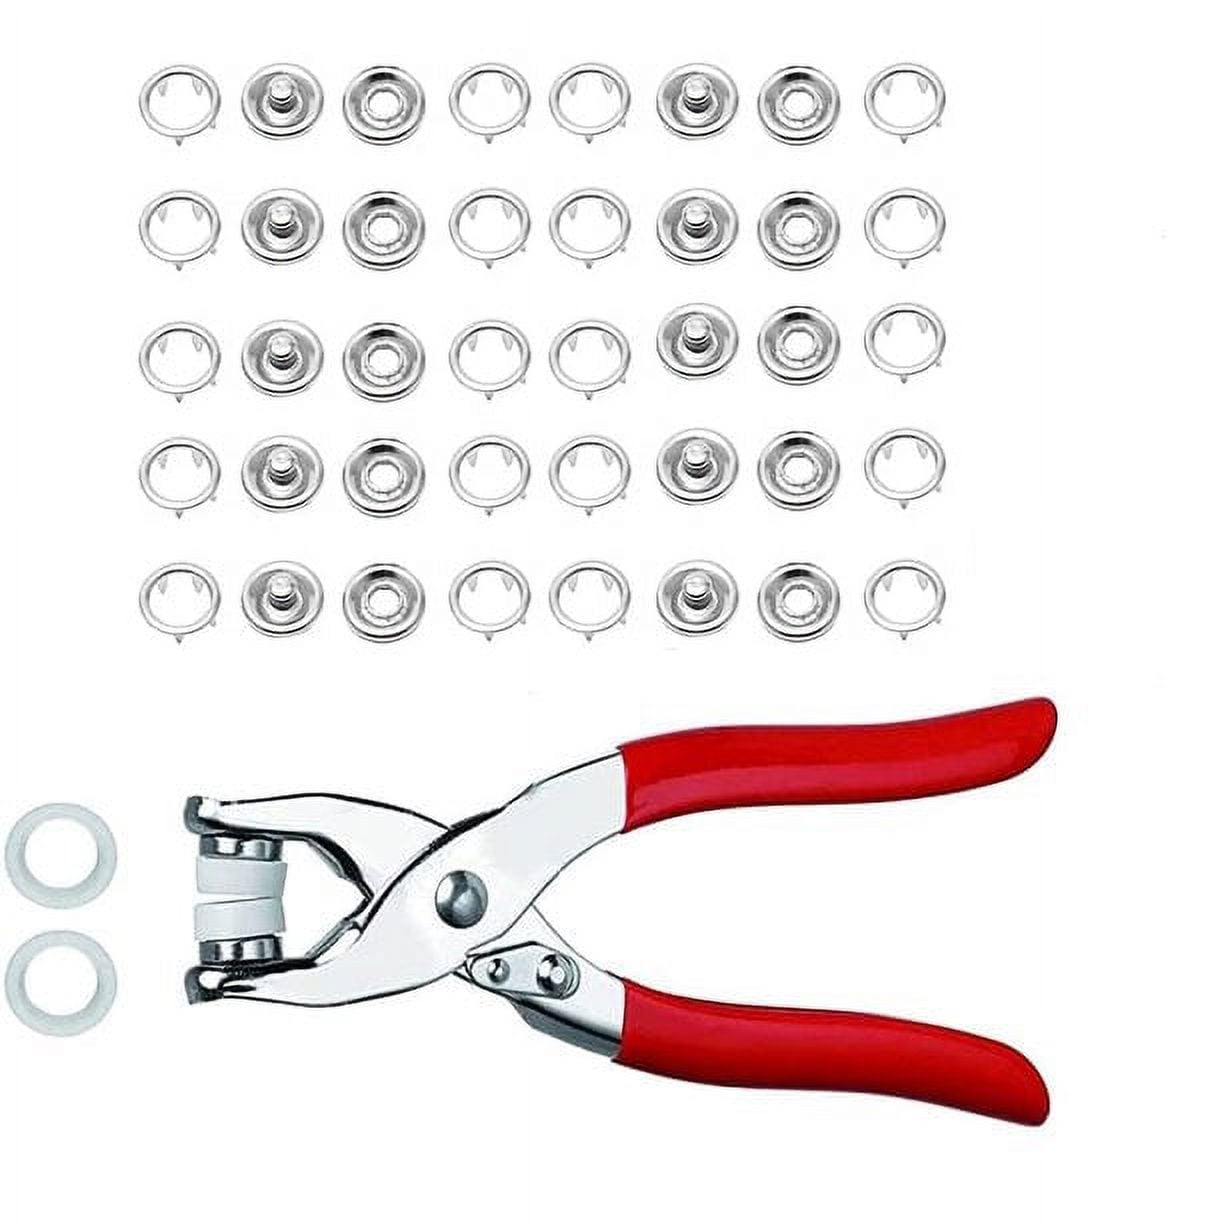 Metal Watch Hole Patch Kit With Prong Snaps, Buttons, Fastener Pliers, And  Sewing Tools 0.375 Inch Press For Clothing Repair From Sidneyster, $28.36